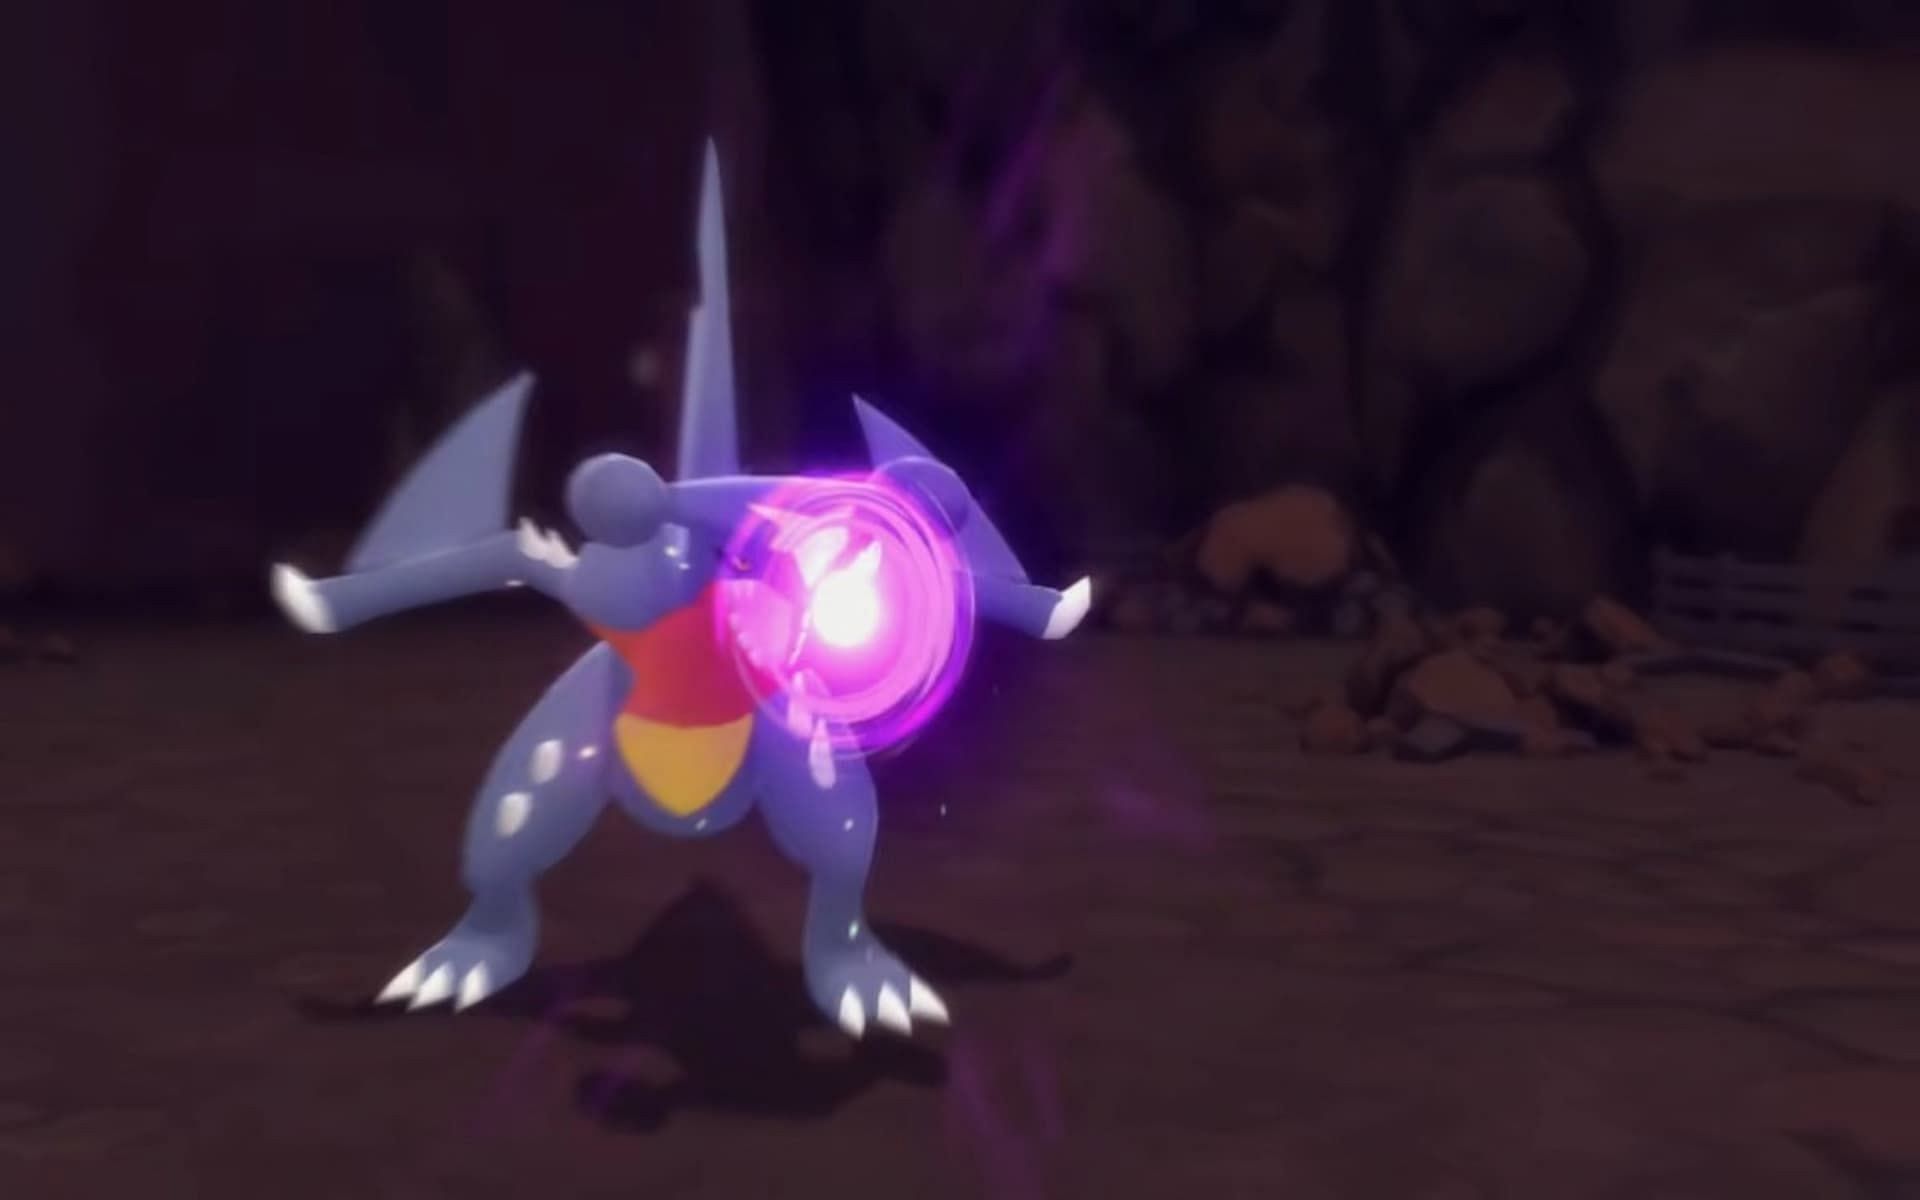 Garchomp readying an attack in Pokemon Brilliant Diamond and Shining Pearl (Image via Nintendo)